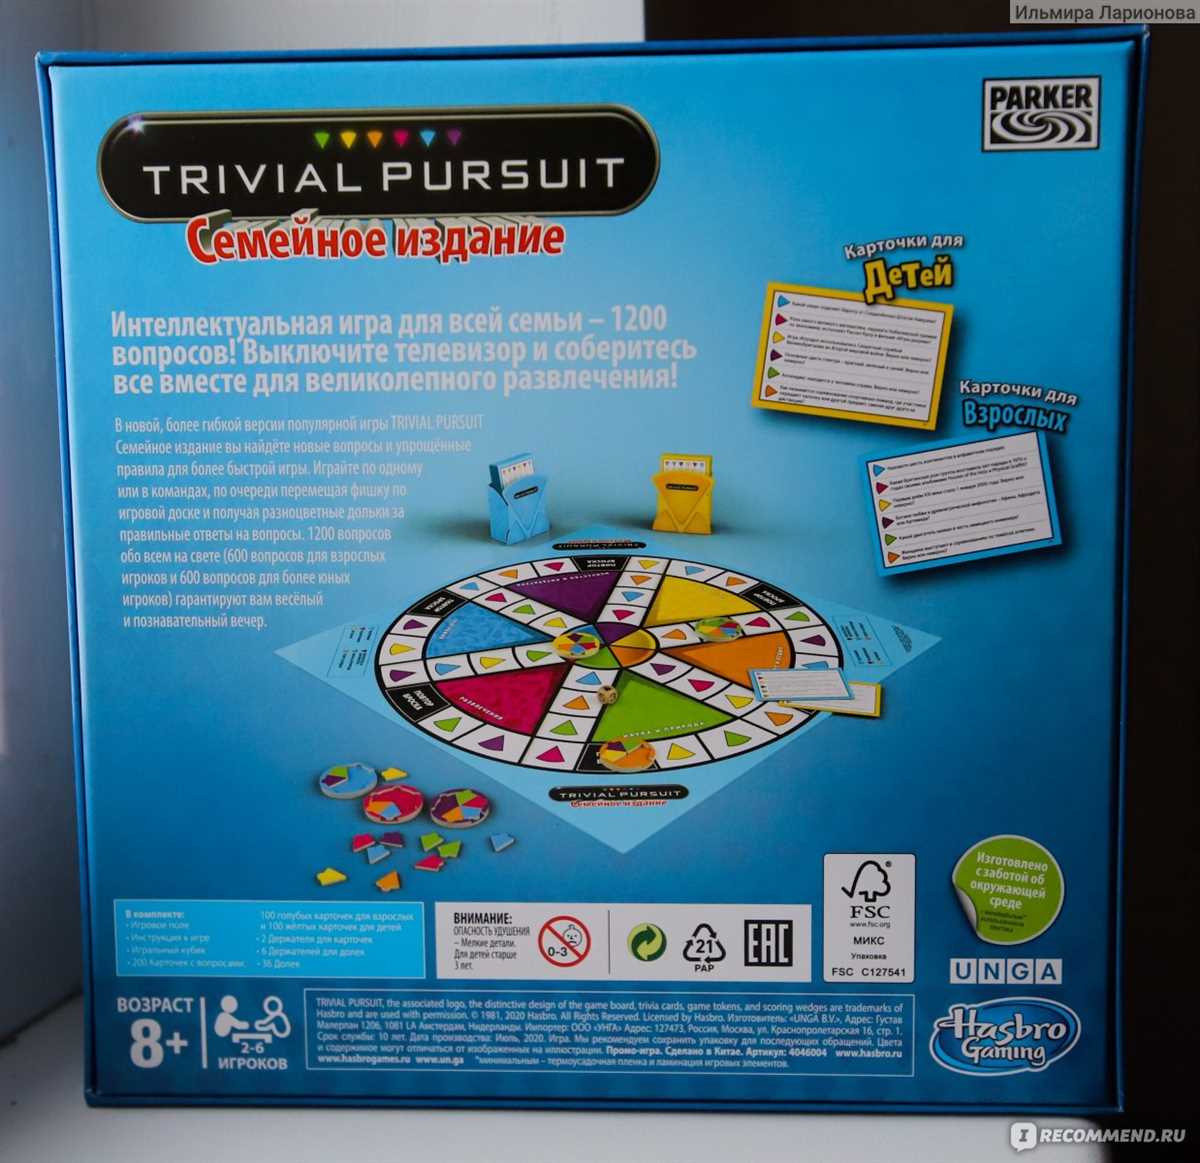 Top Websites that Provide Reliable Badgehungry Trivial Pursuit Answers